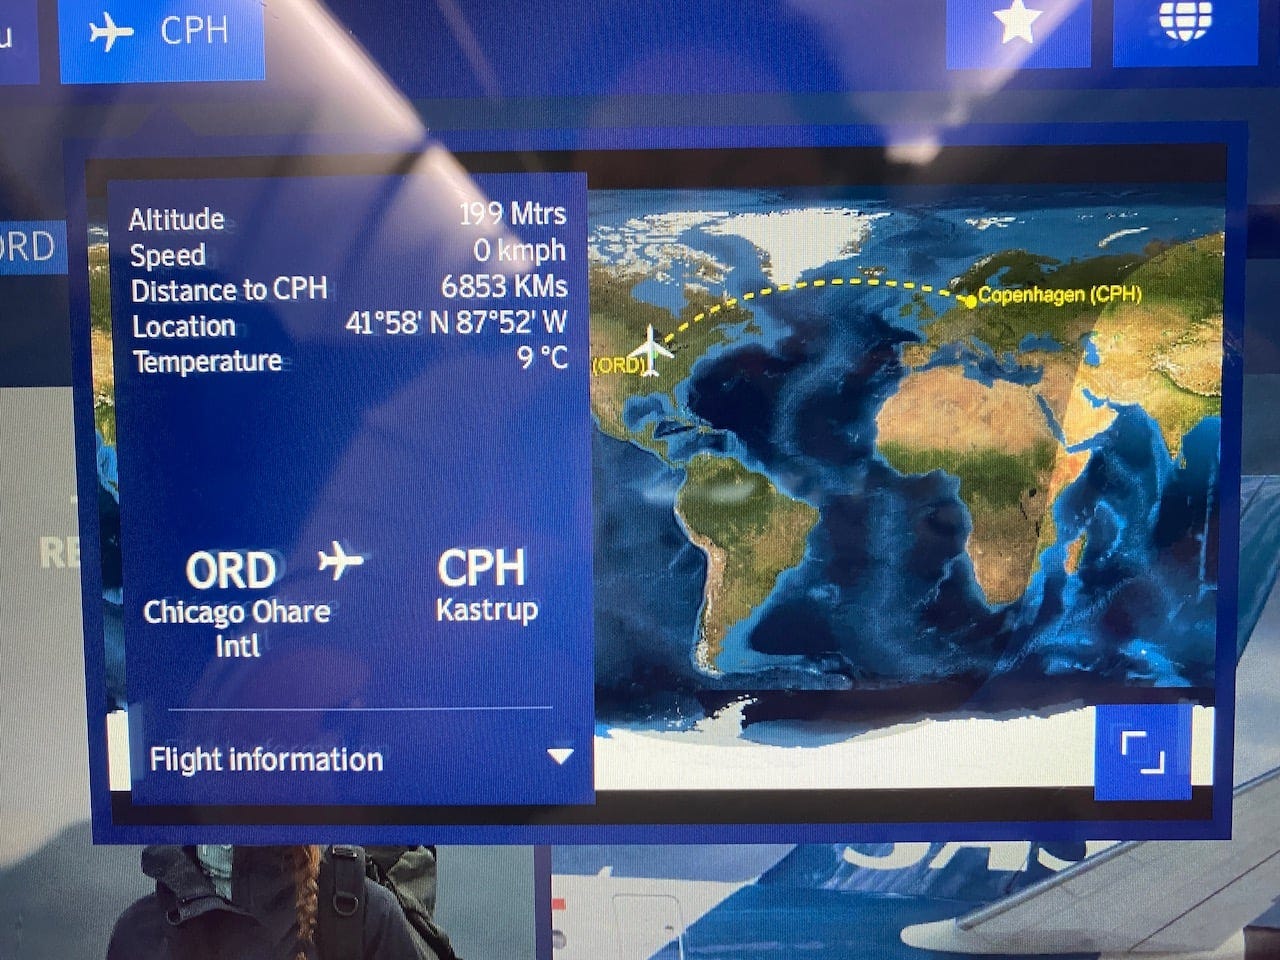 electronic display on the seatback showing flight information for SAS flight 944 with non-stop service from Chicago O'Hare to Copenhagen Kastrup